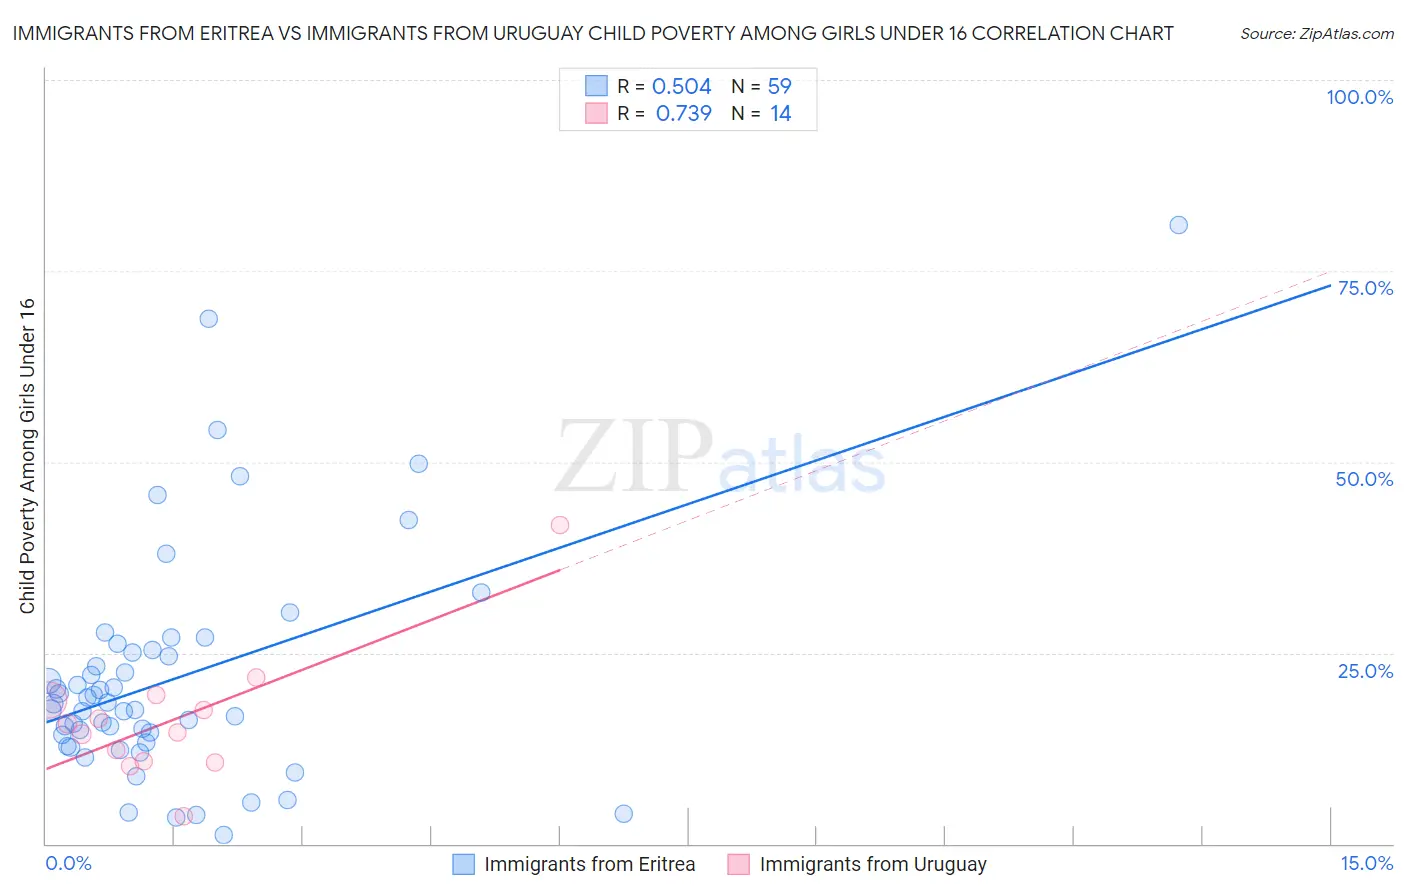 Immigrants from Eritrea vs Immigrants from Uruguay Child Poverty Among Girls Under 16